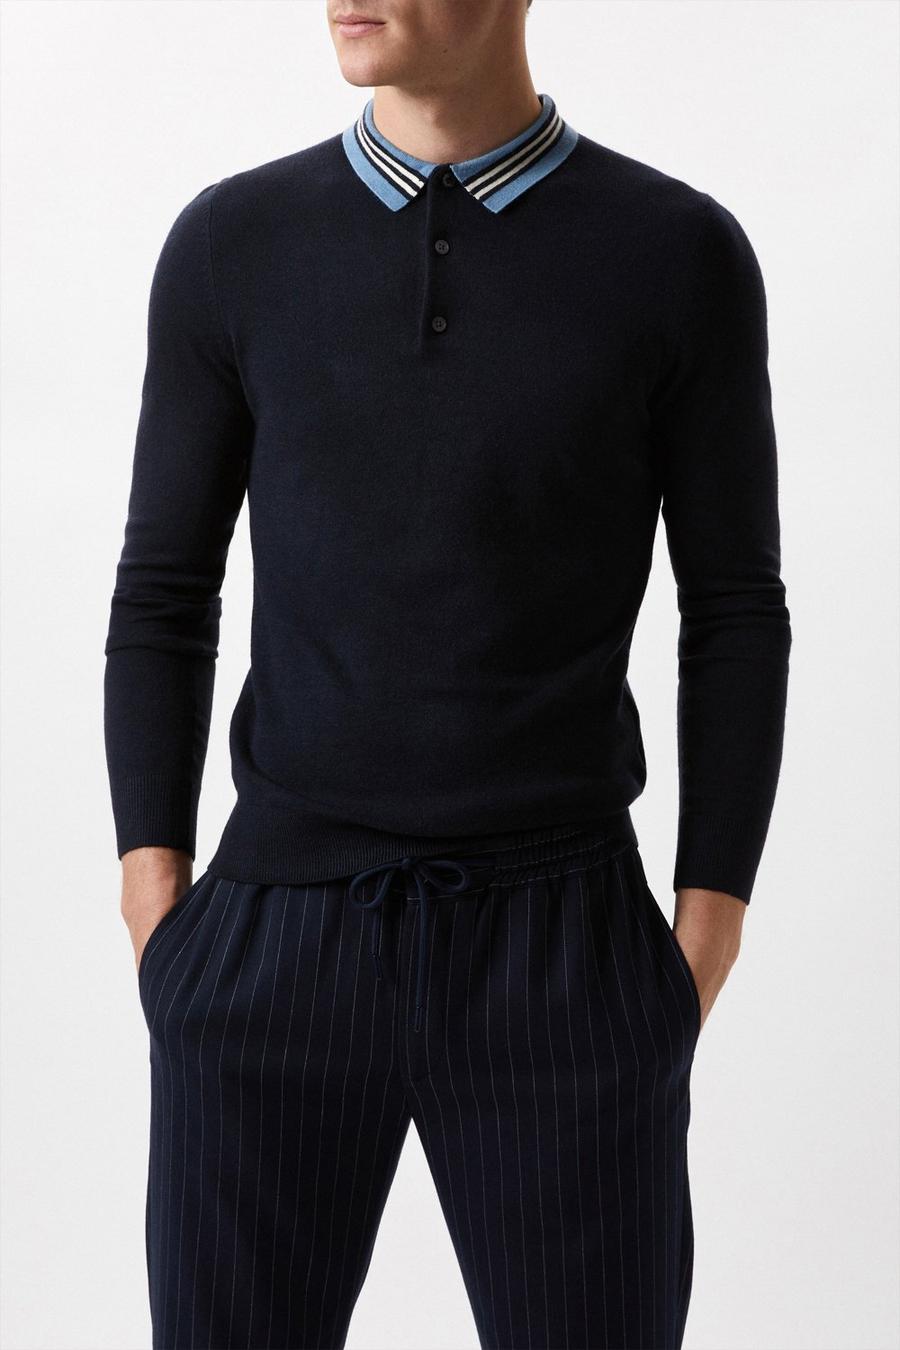 Super Soft Navy Collar Detail Knitted Polo Shirt